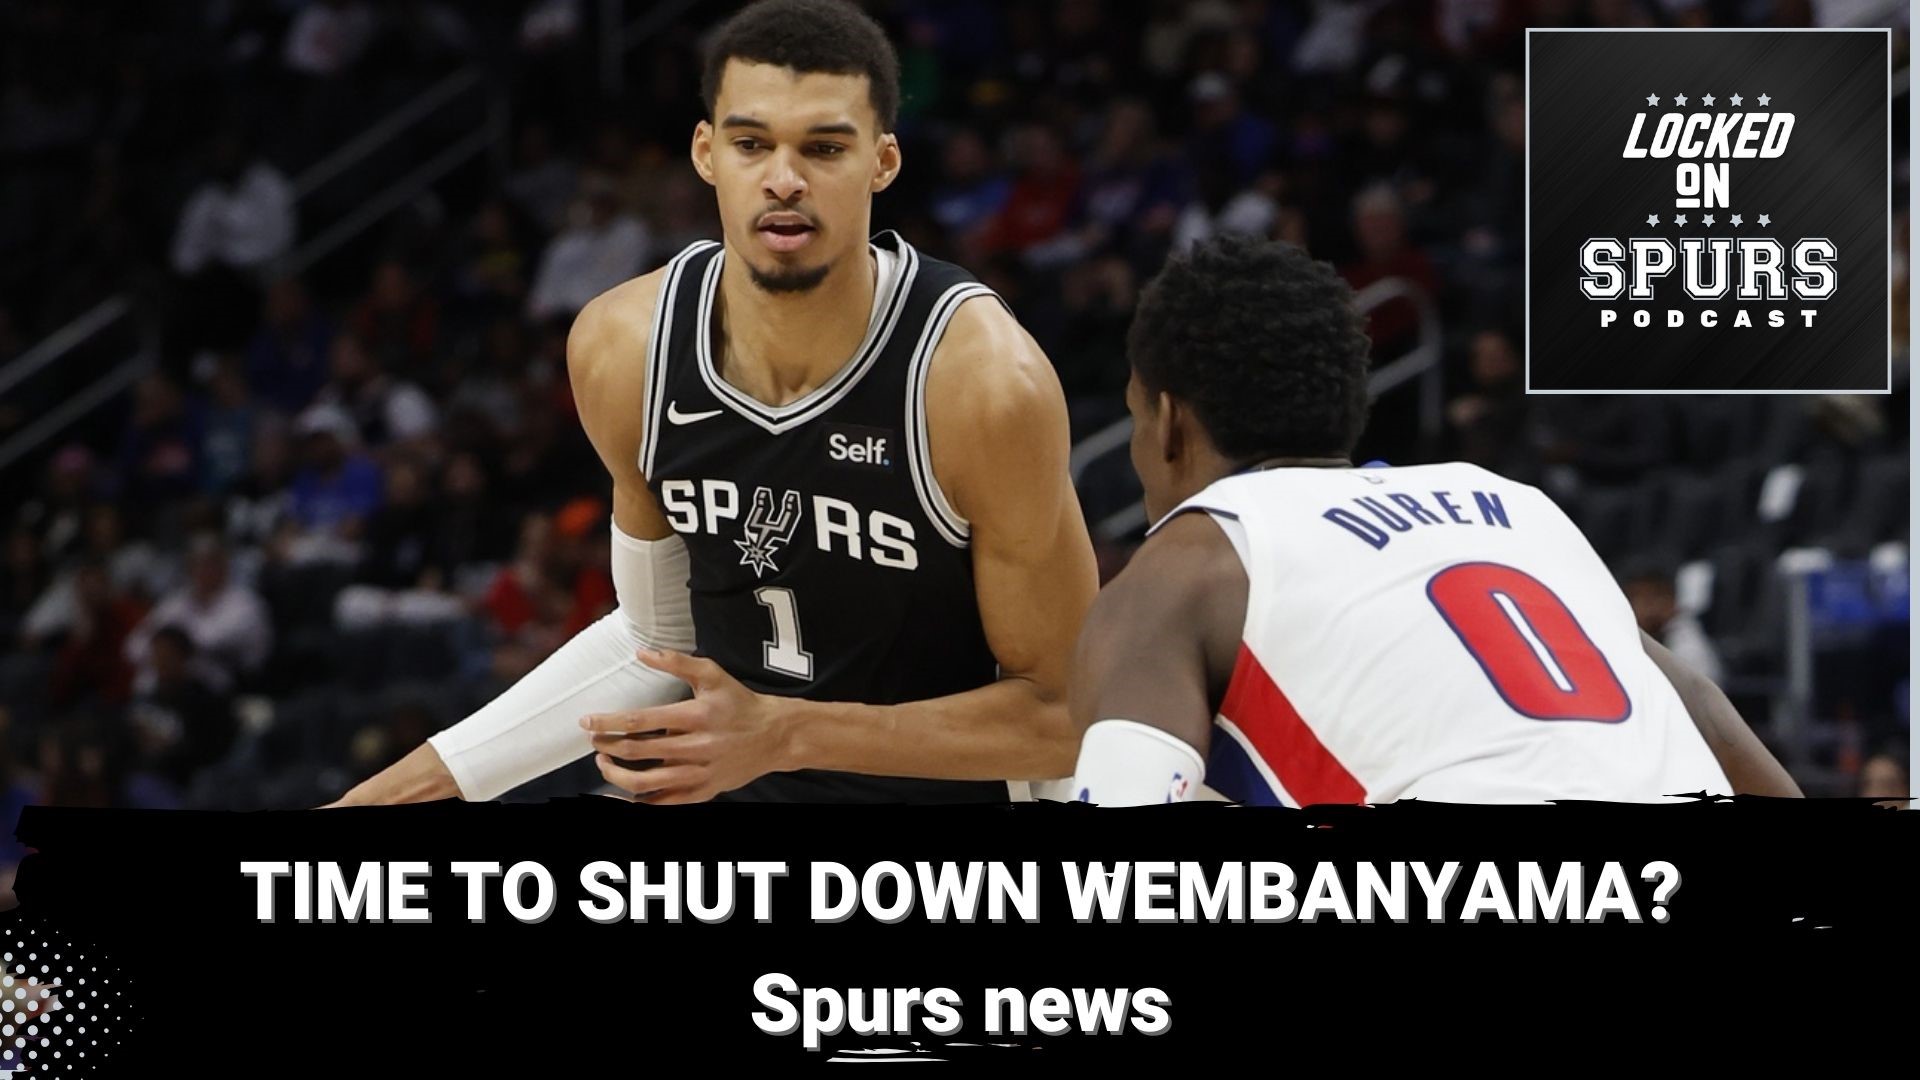 With the Spurs season winding down, is it prudent for the team to shut down Wembanyama for the season?